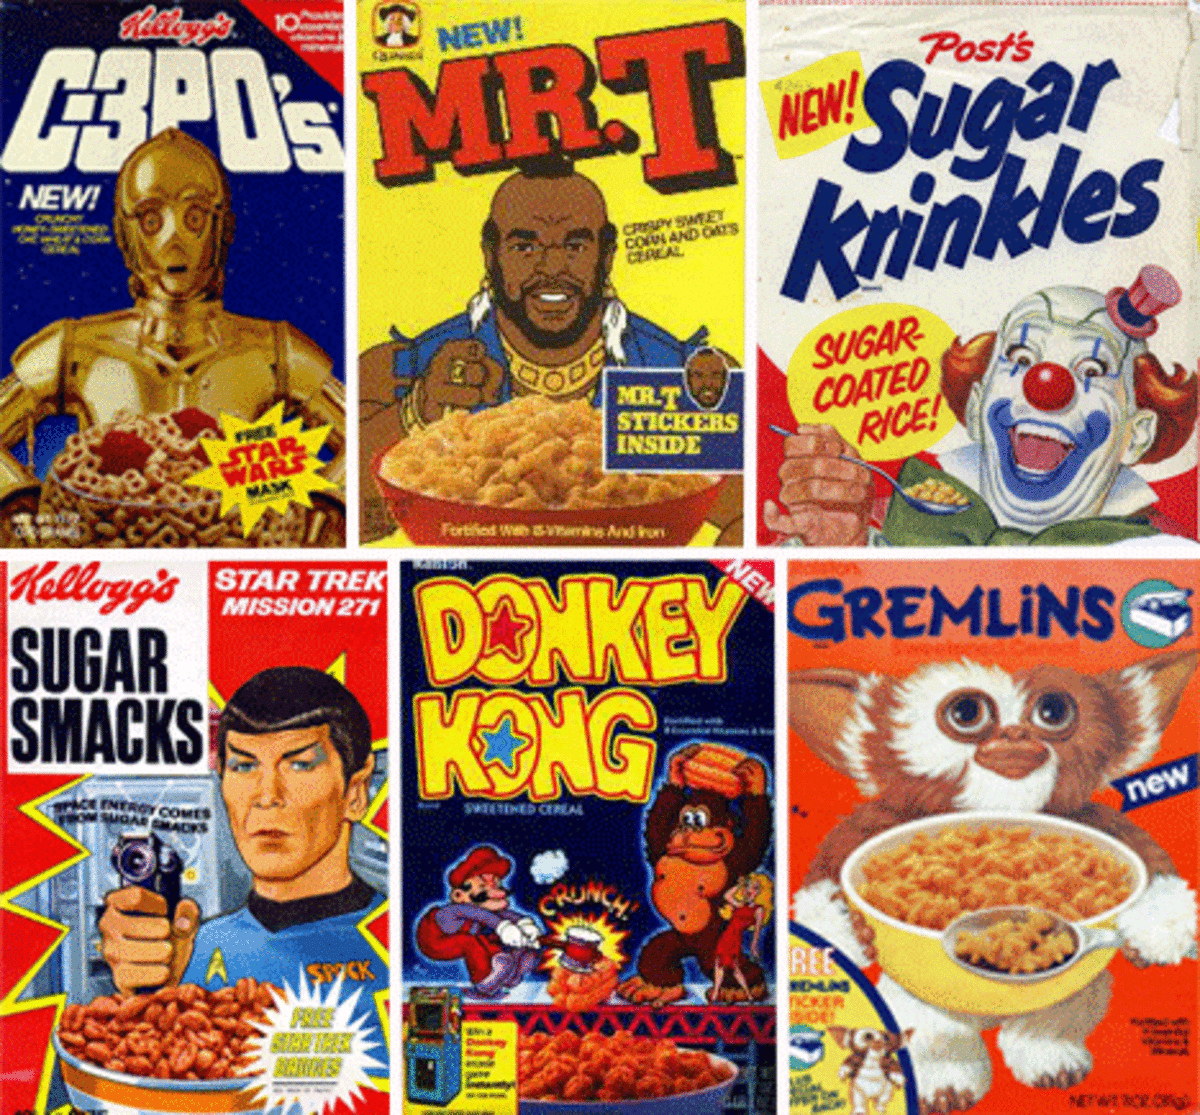 Old cereal boxes.  That clown is creepy!!!